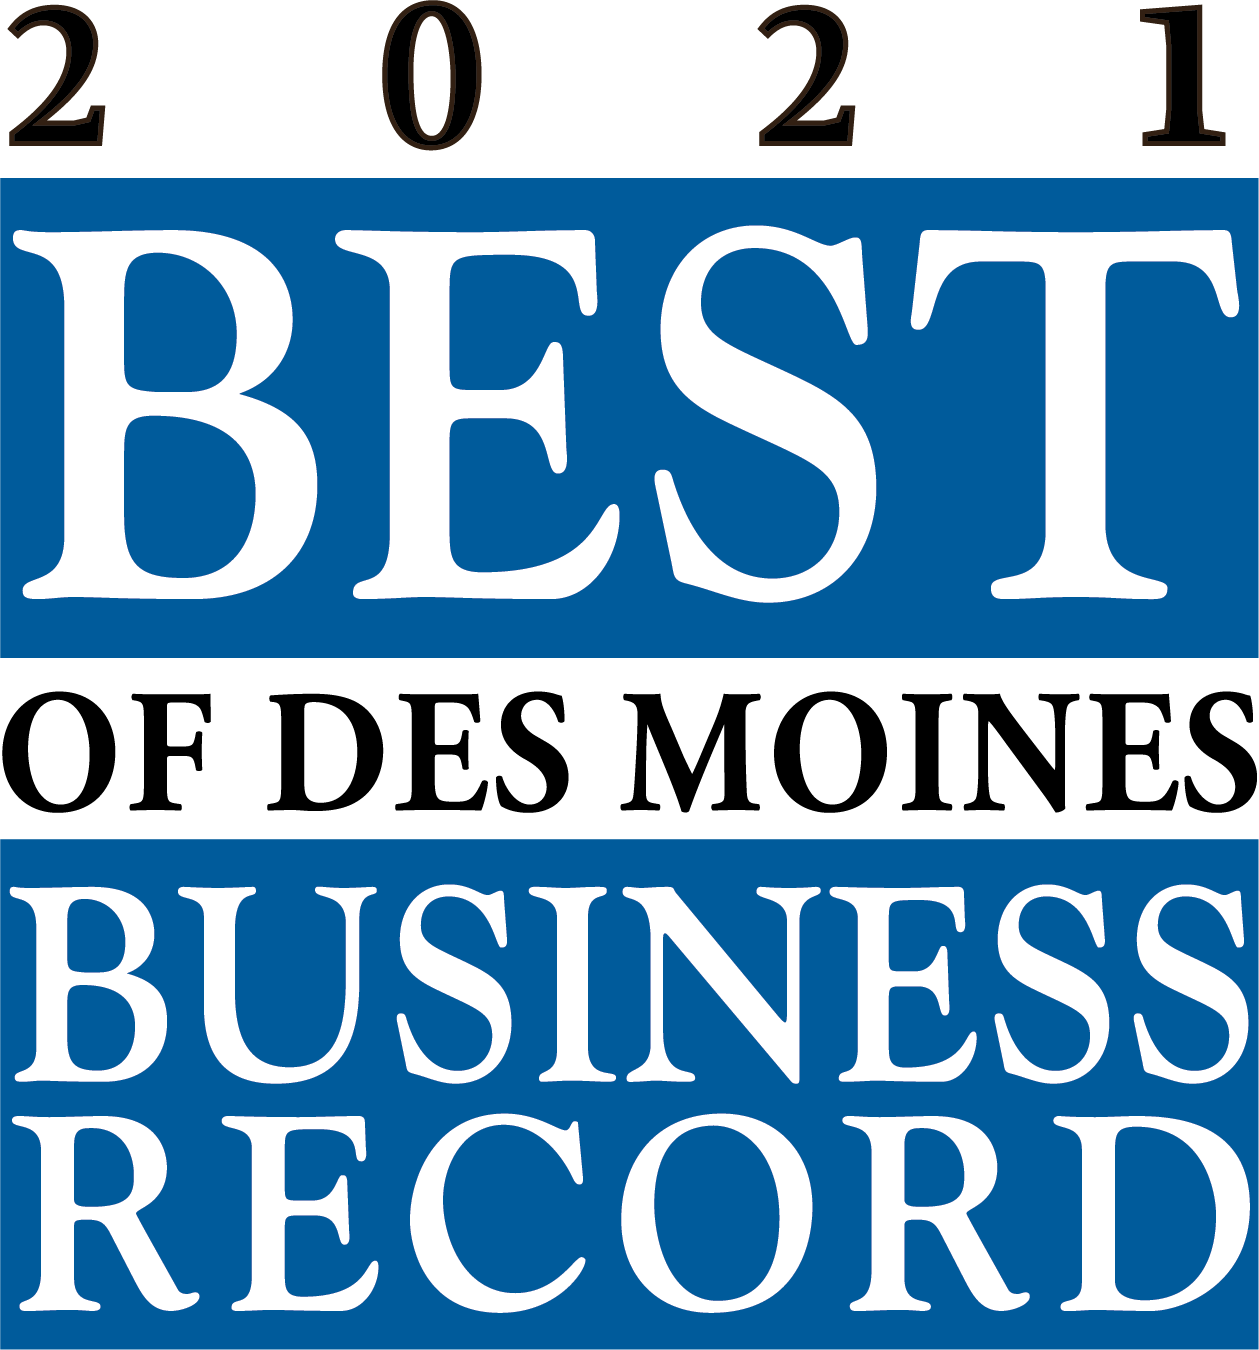 Best of Business Record Award